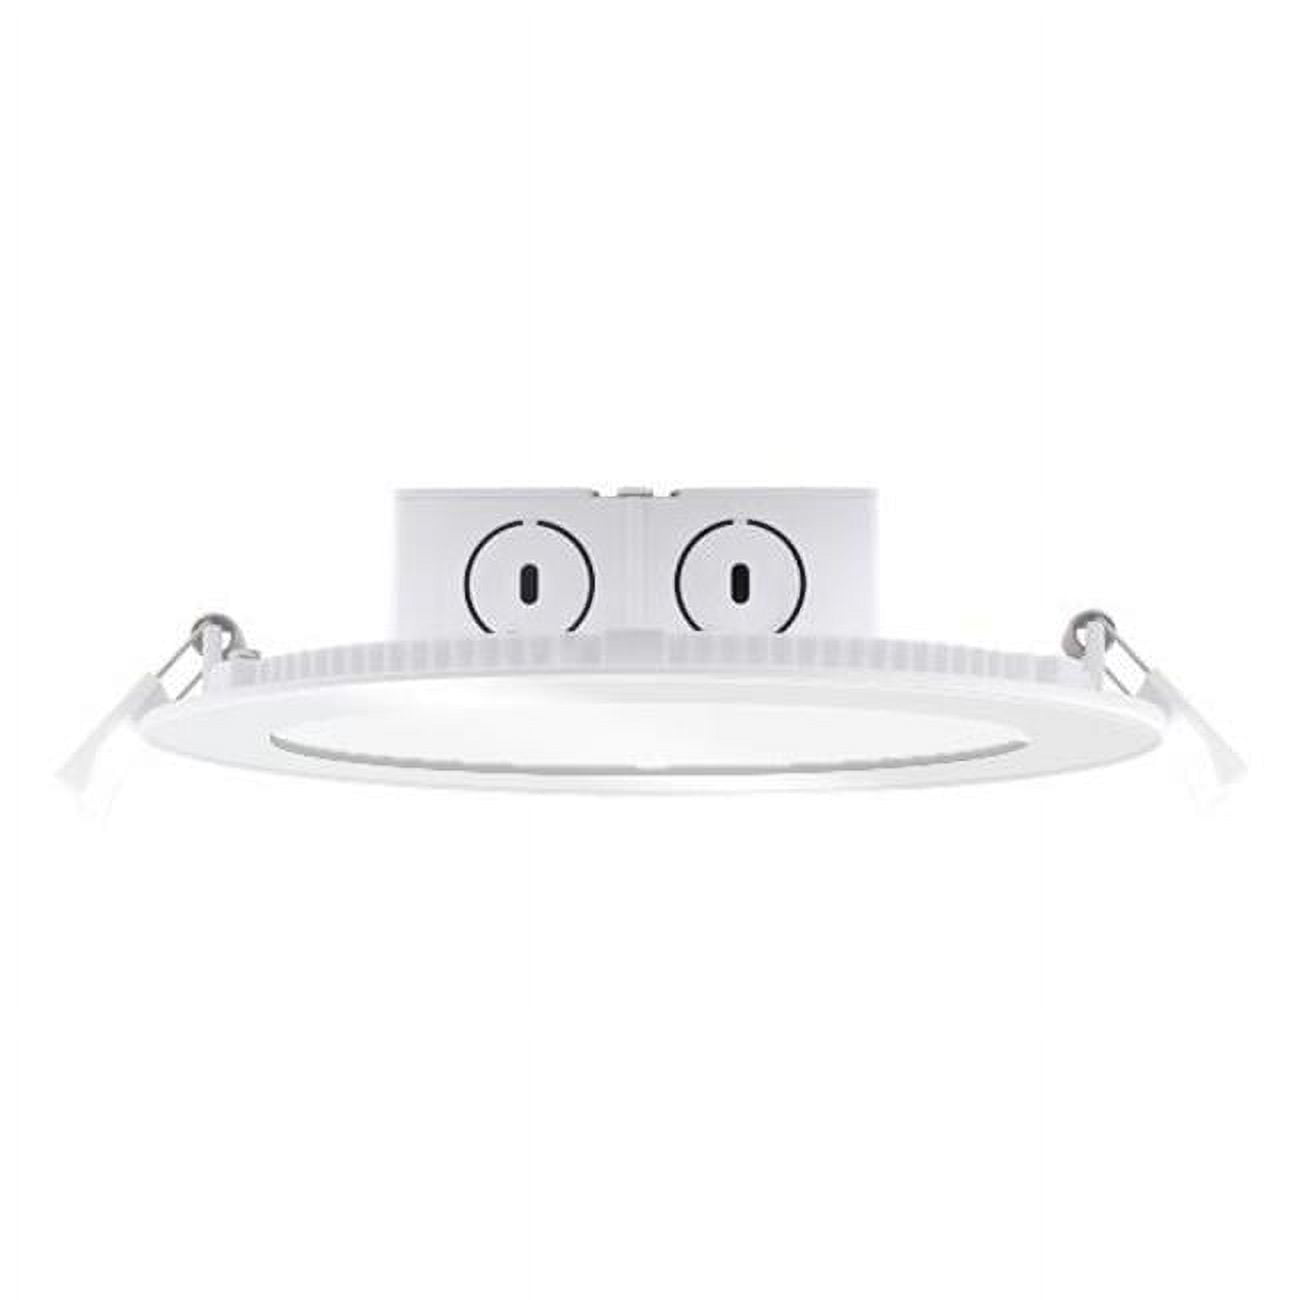 Picture of Bulbrite Pack of (2) LED 6&quot; Round Flat Downlight Fixture with Jbox  65W Equivalent  2700K/Warm White  White Finish